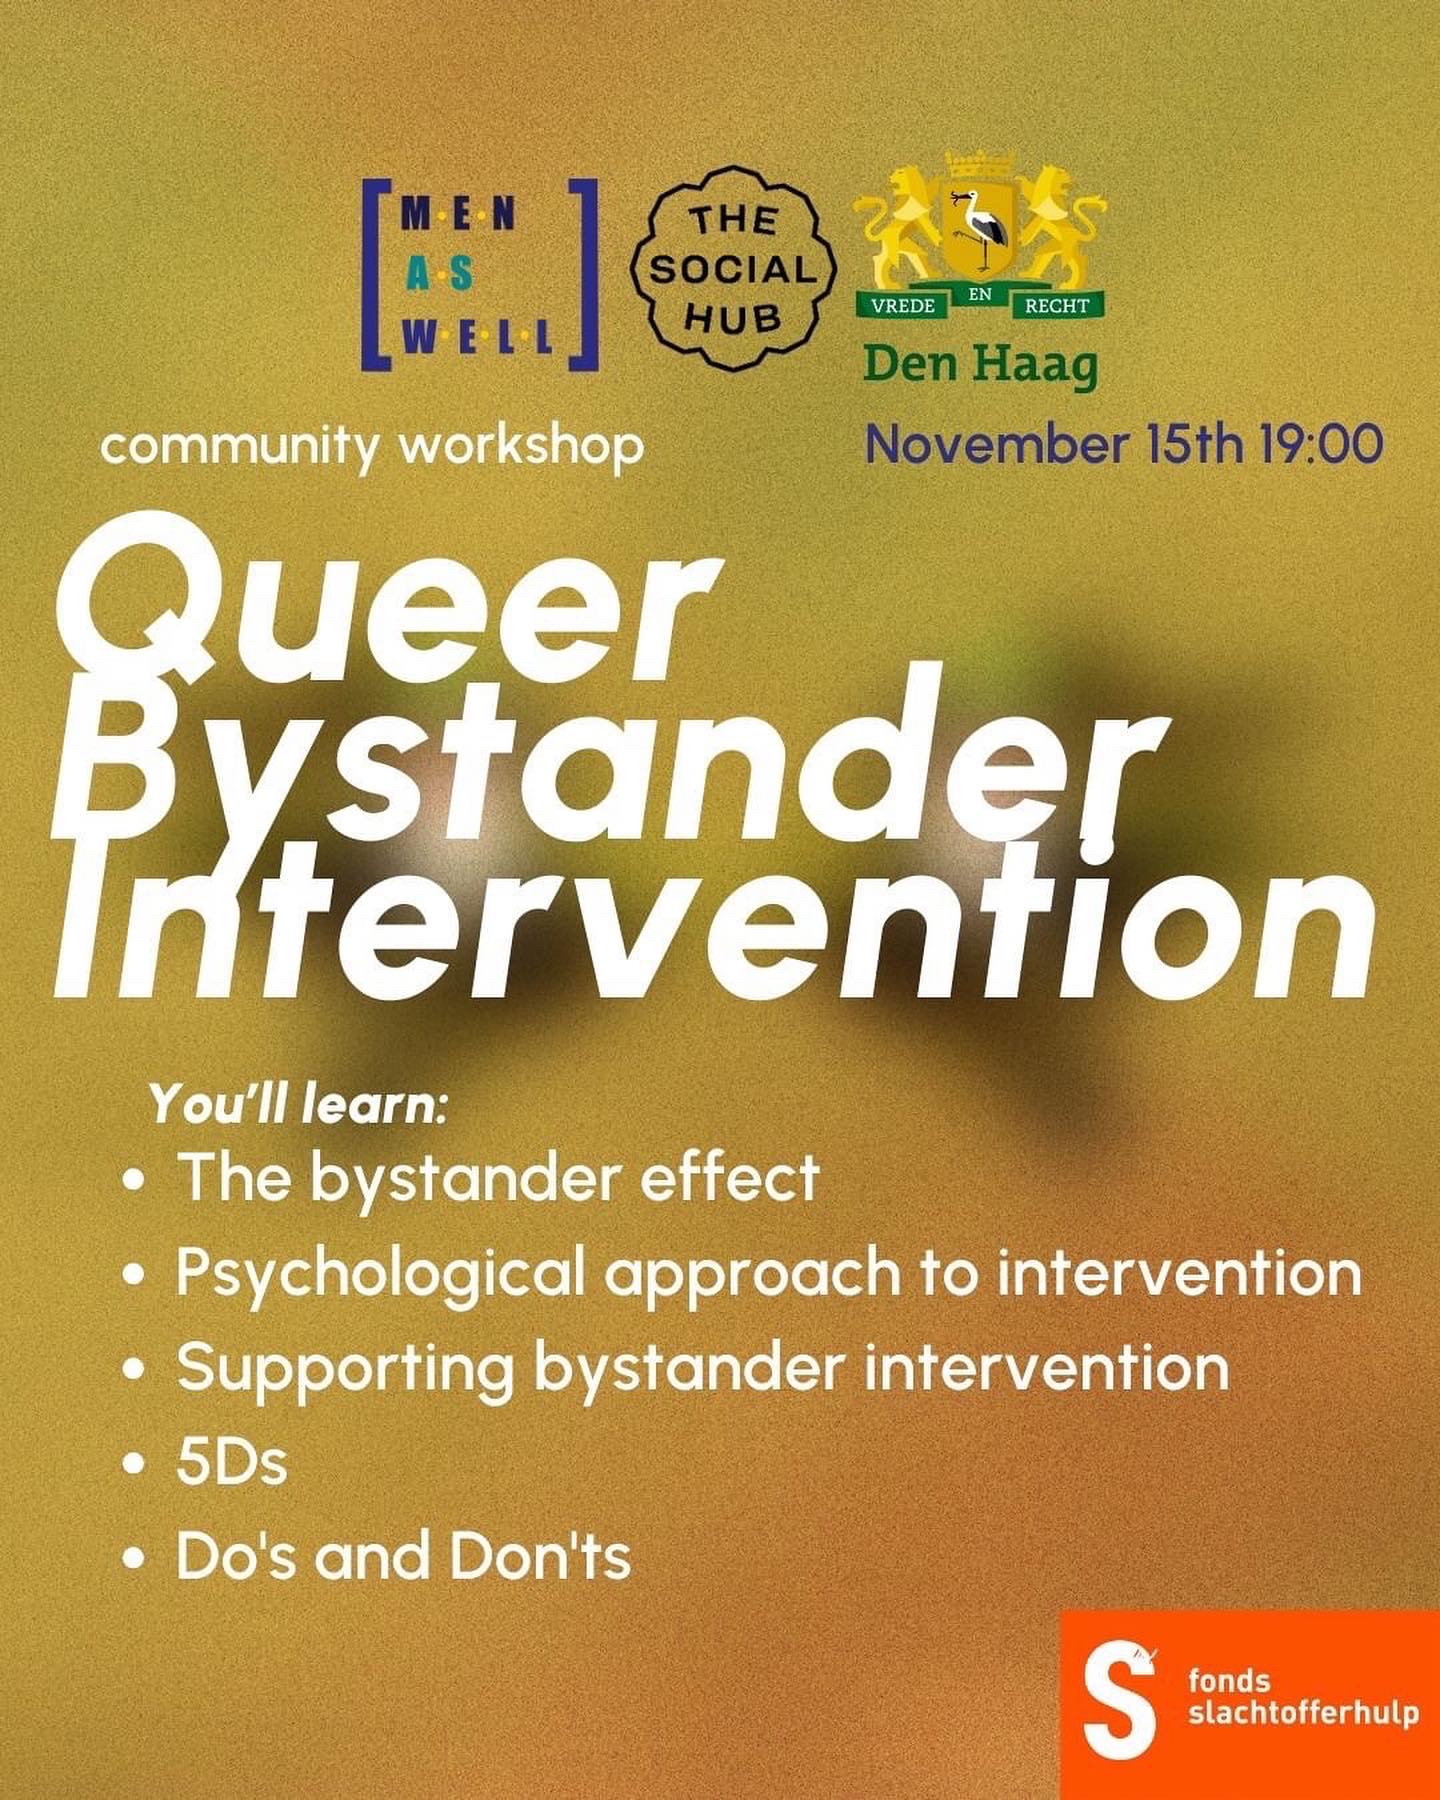 Flyer community workshops with dates, venue and logo's from, amongst others, MenAsWell, the municipality of The Hague, the Social Hub the Hague, and the fund for help to victims, Fonds Slachtofferhulp.